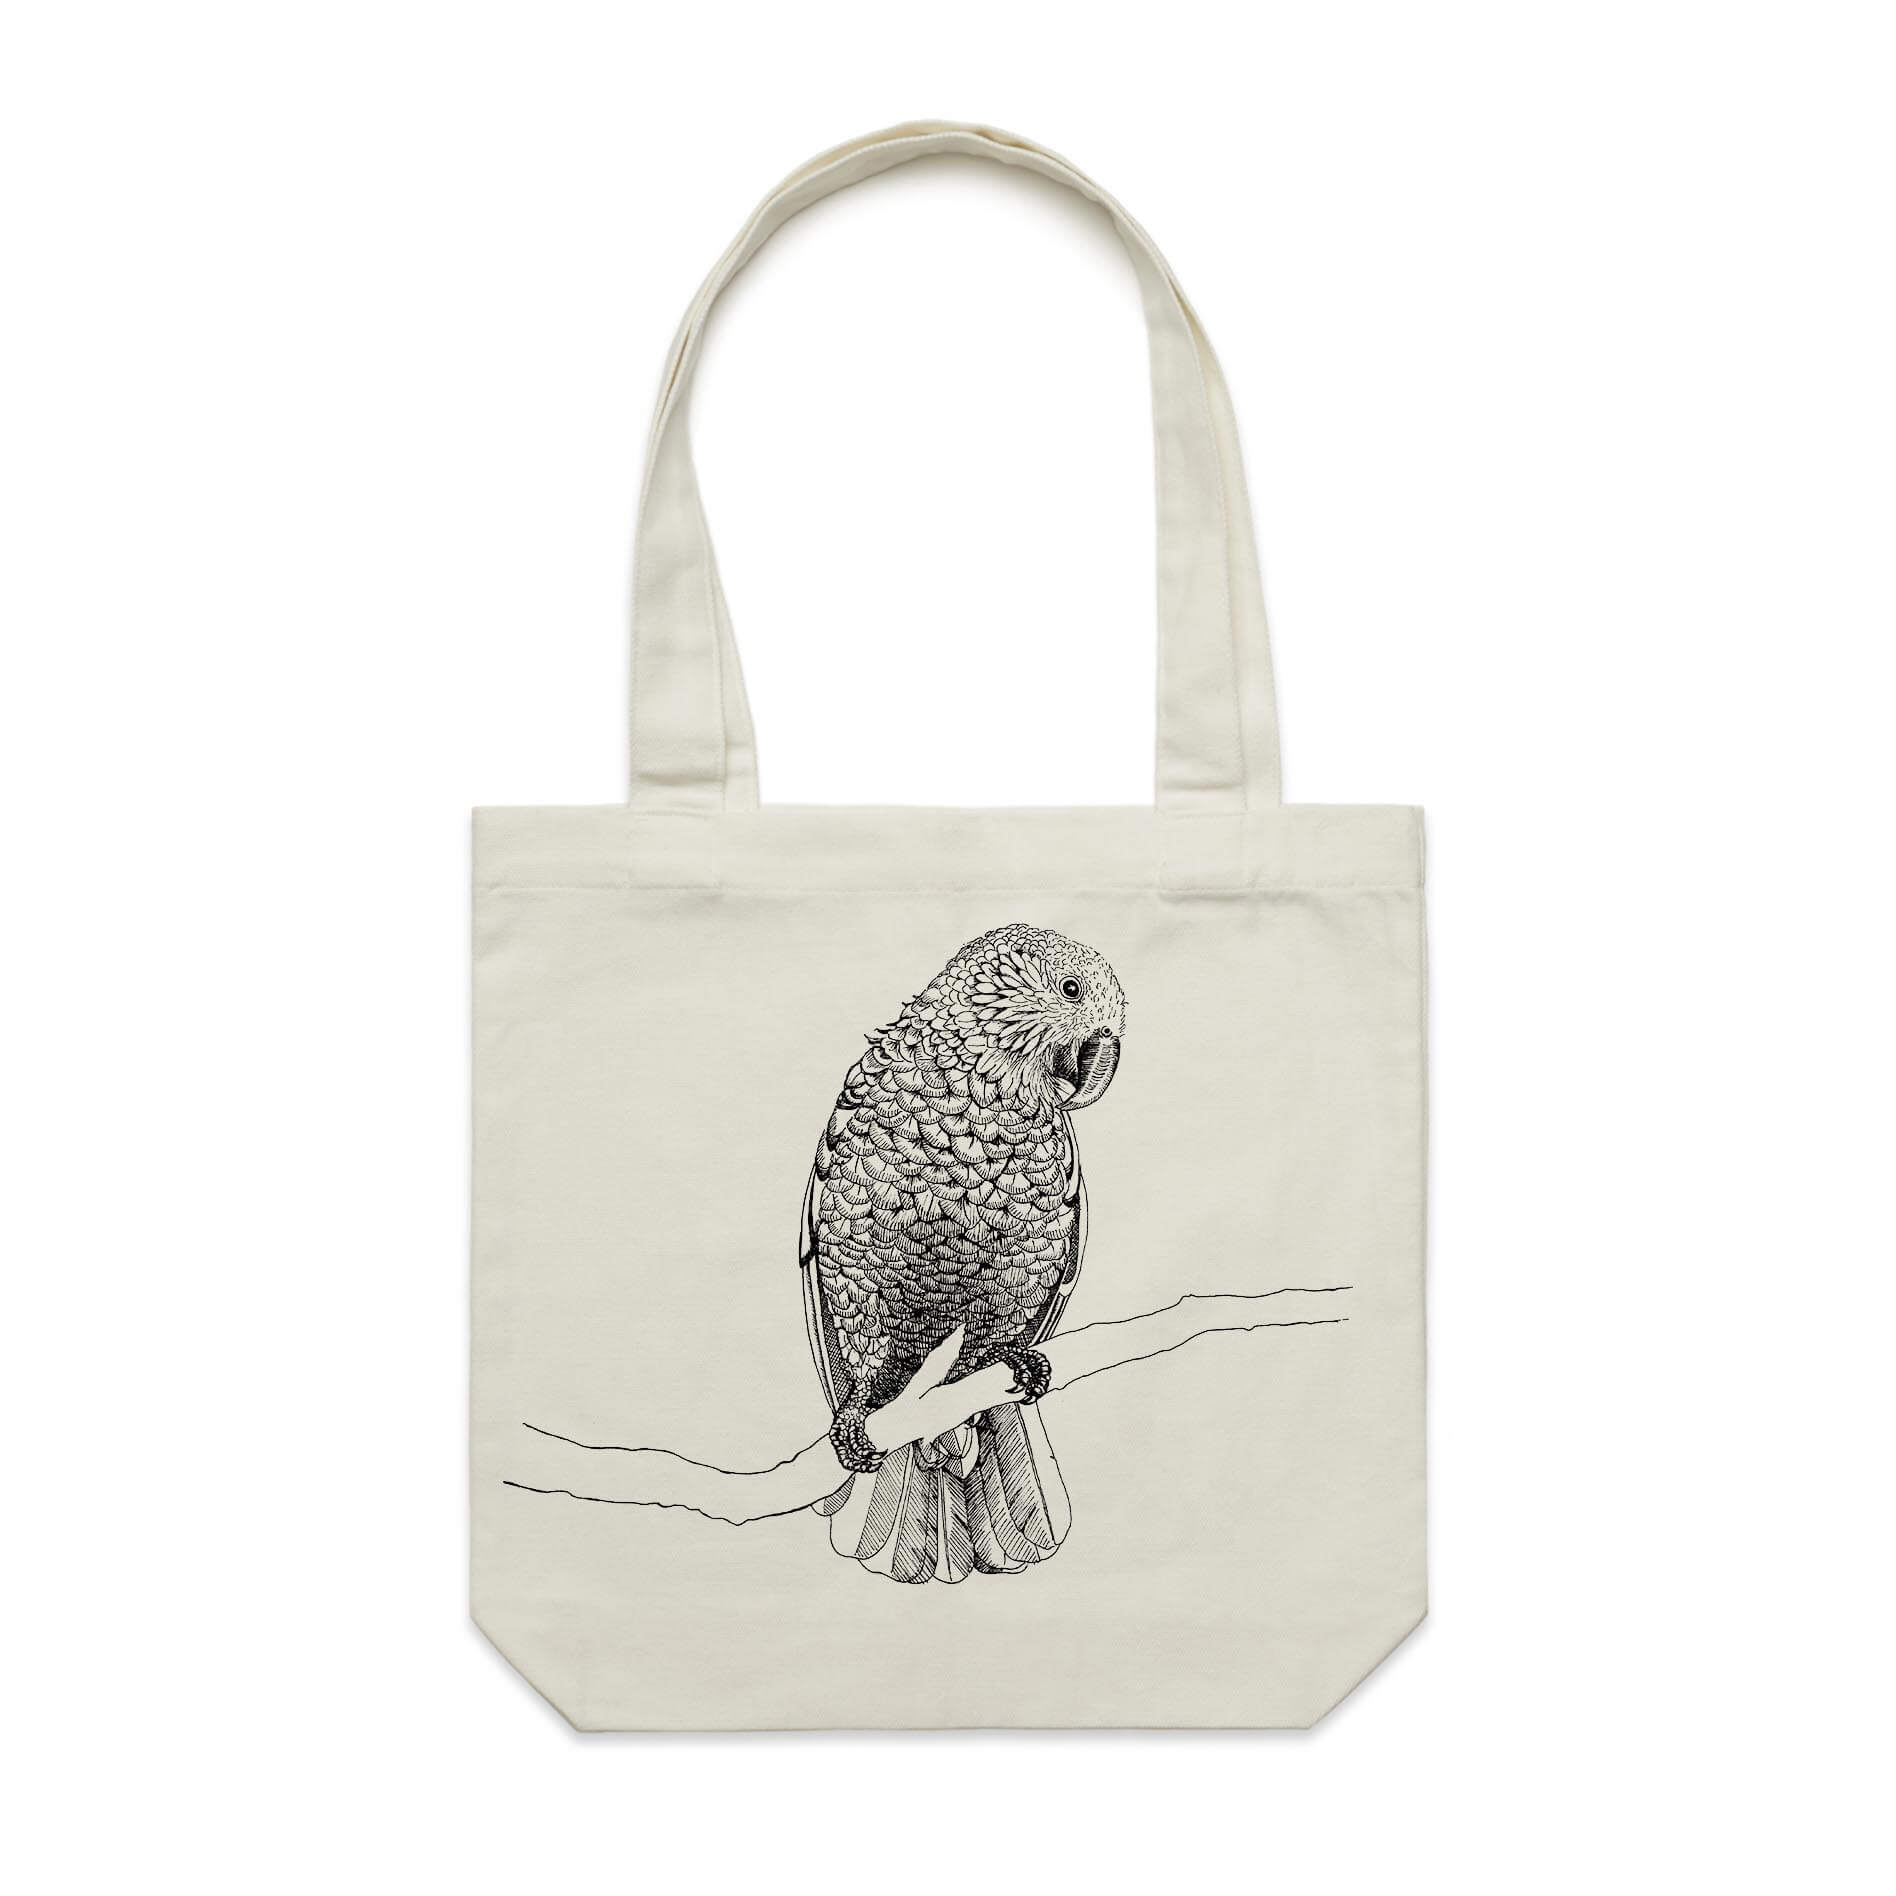 Cotton canvas tote bag with a screen printed Kaka design.